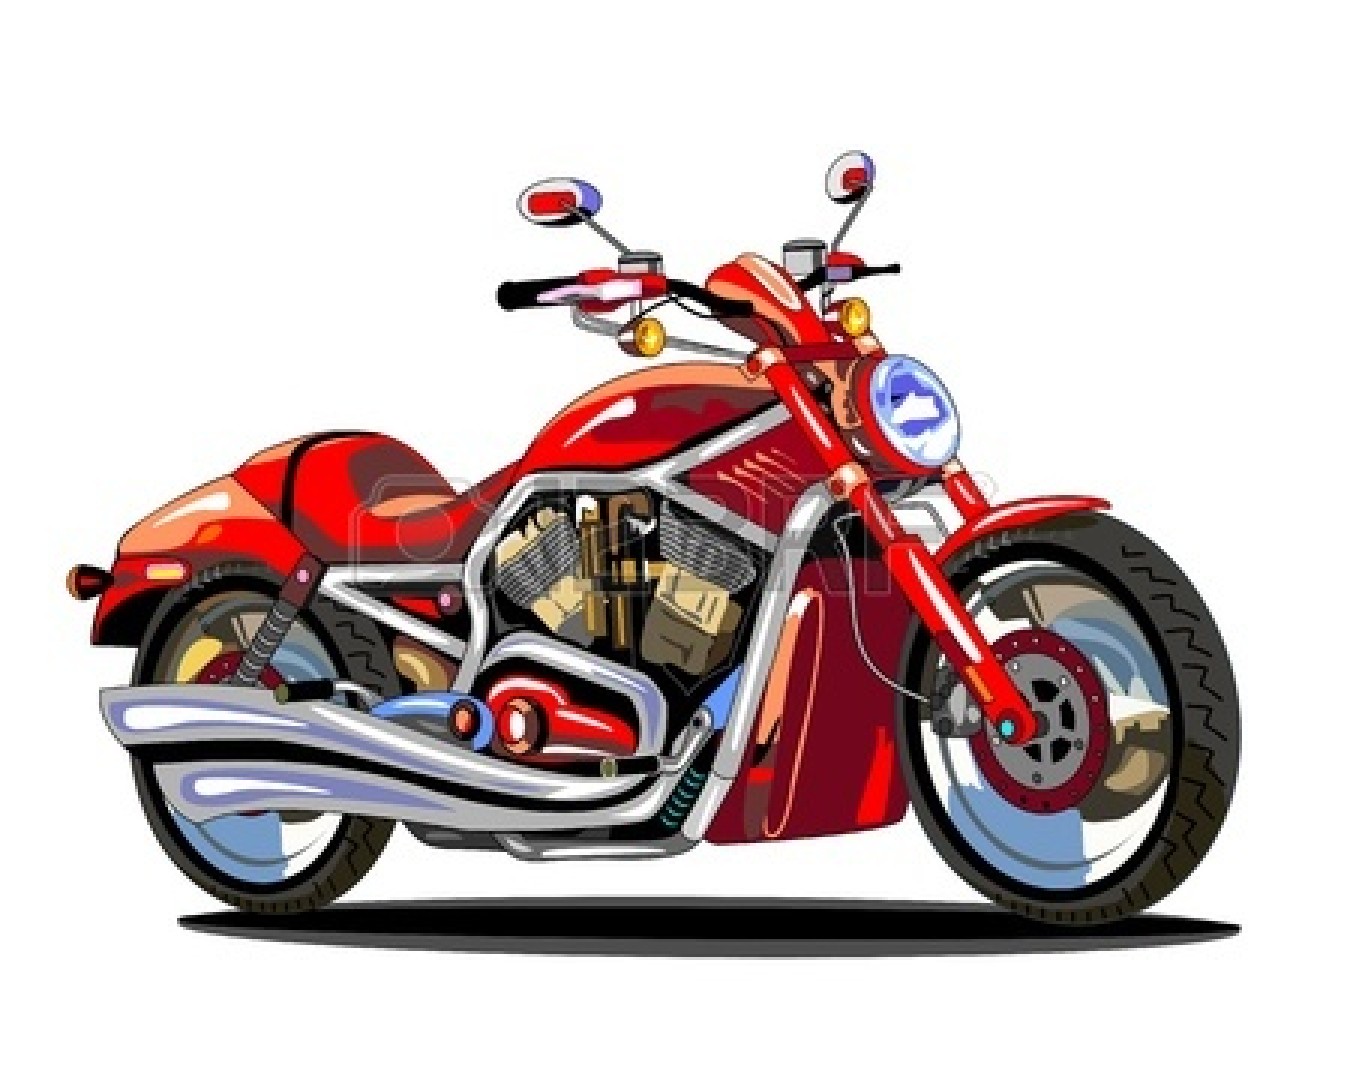 Free Images Motorcycles, Download Free Clip Art, Free Clip.